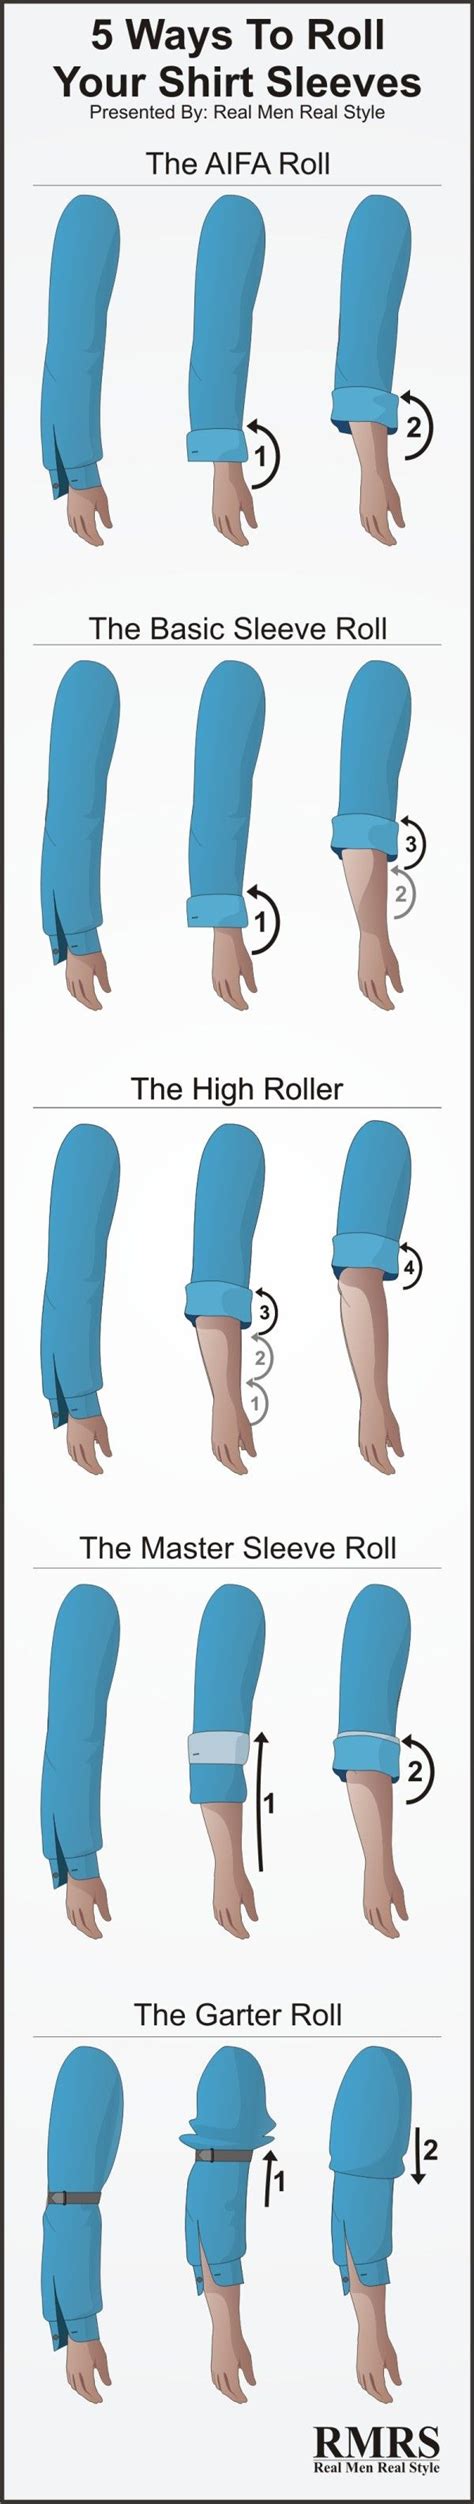 How To Roll Shirt Sleeves 5 Ways To Fold Your Shirt Sleeves Sleeve